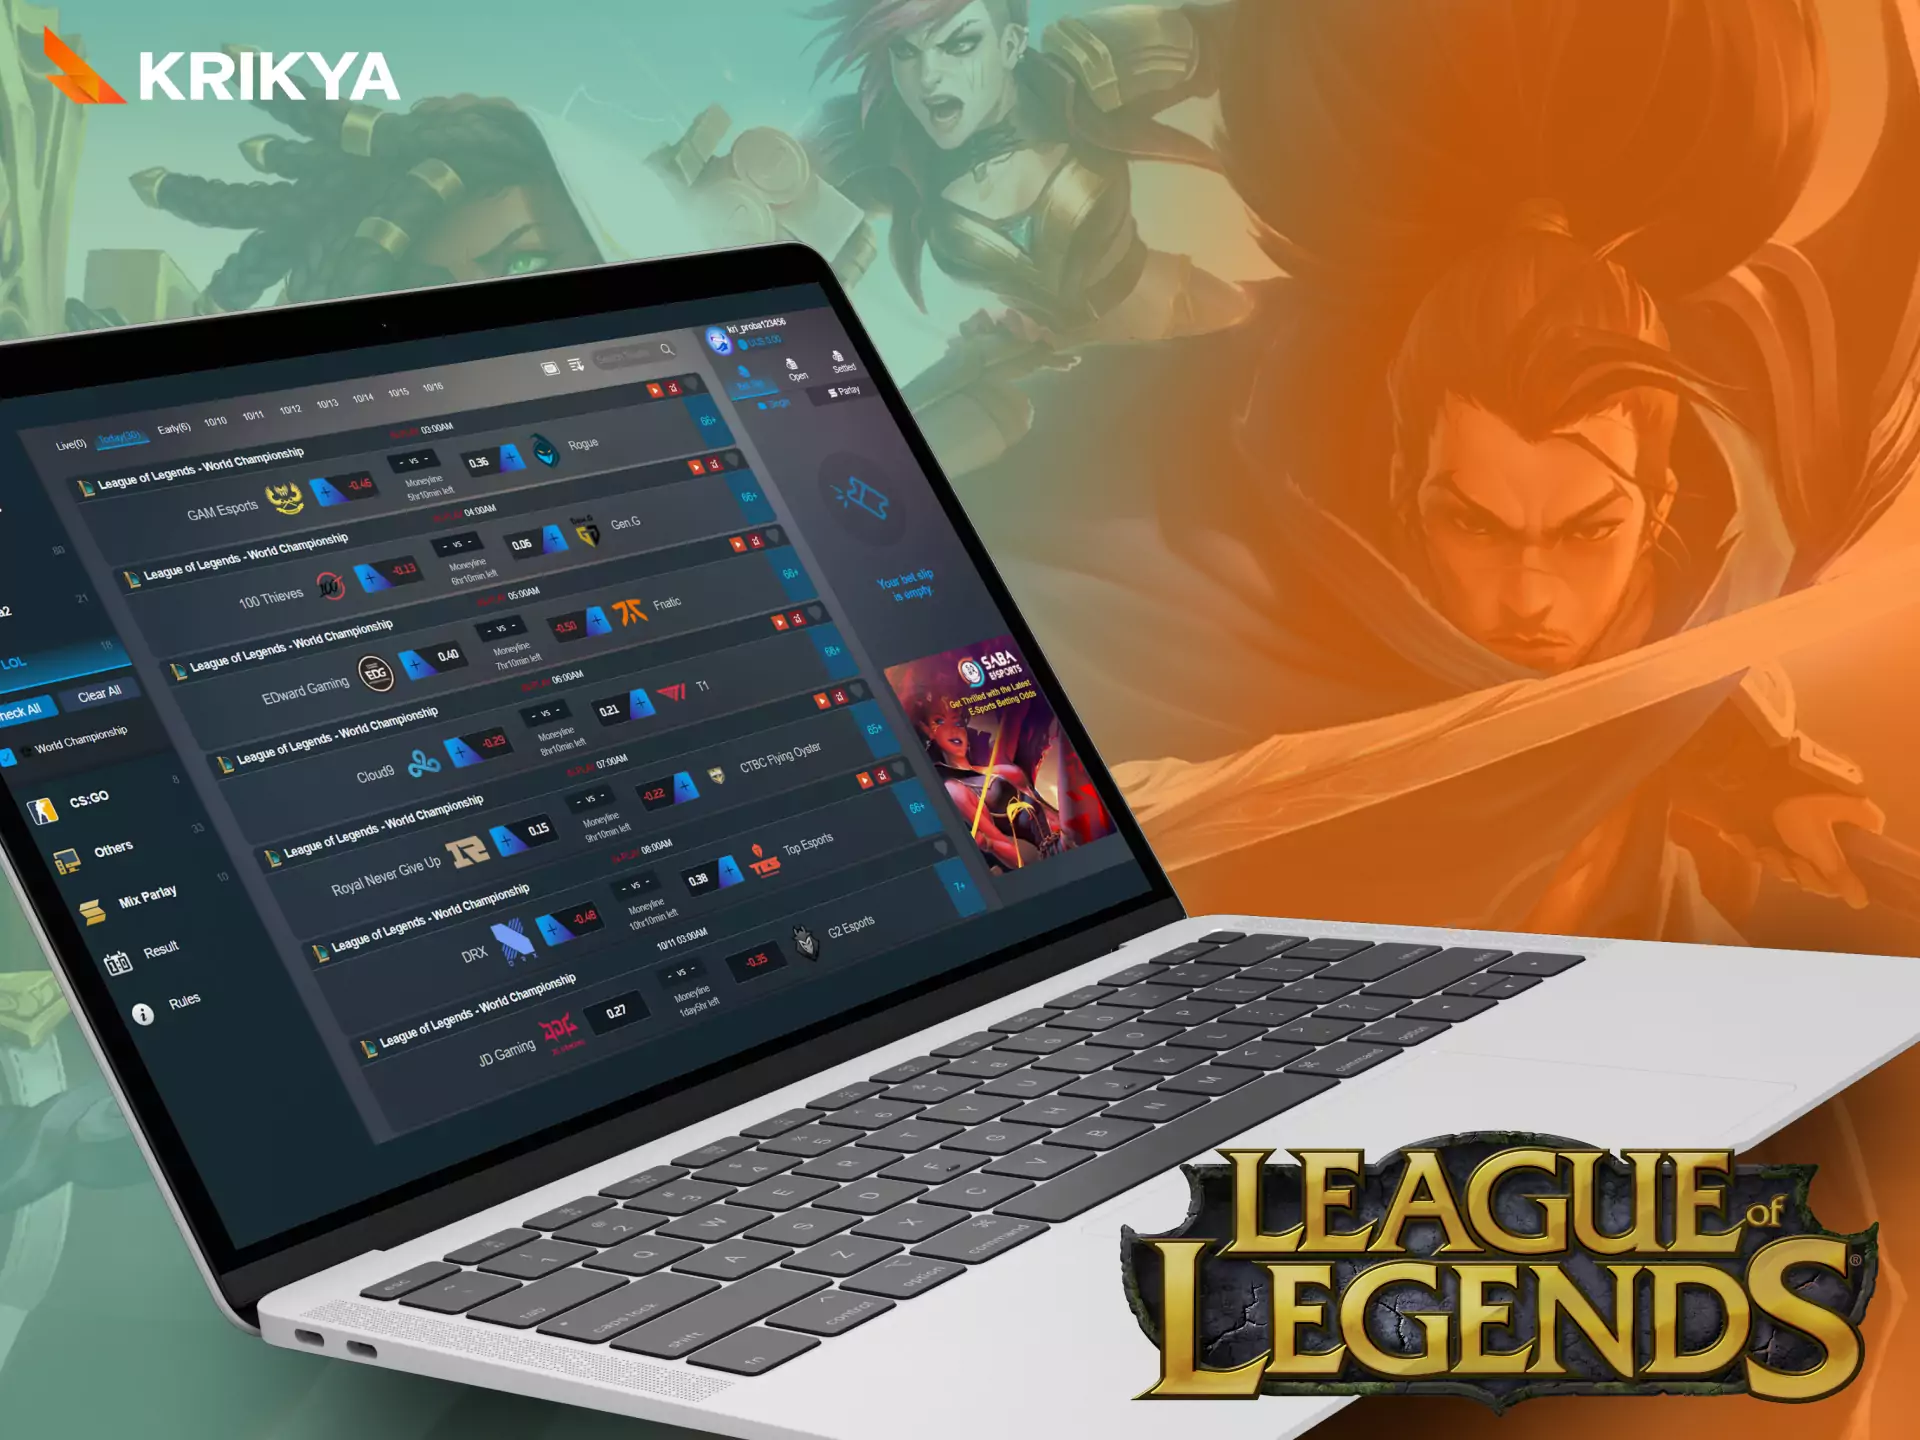 On Krikya, place bets on the League of Legends.